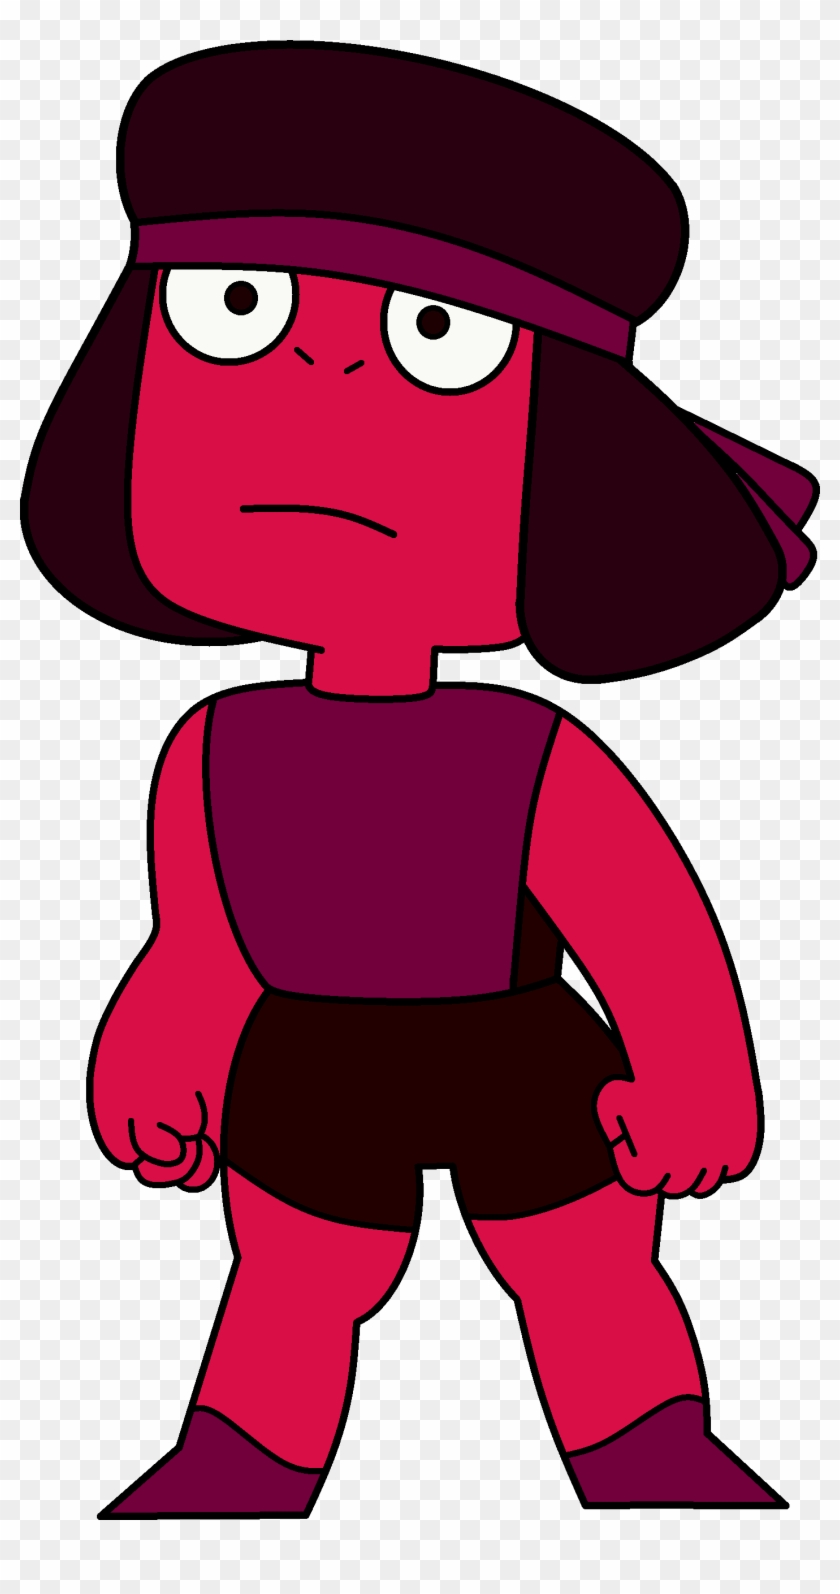 Ruby - Ruby From Stevens Universe #1224009